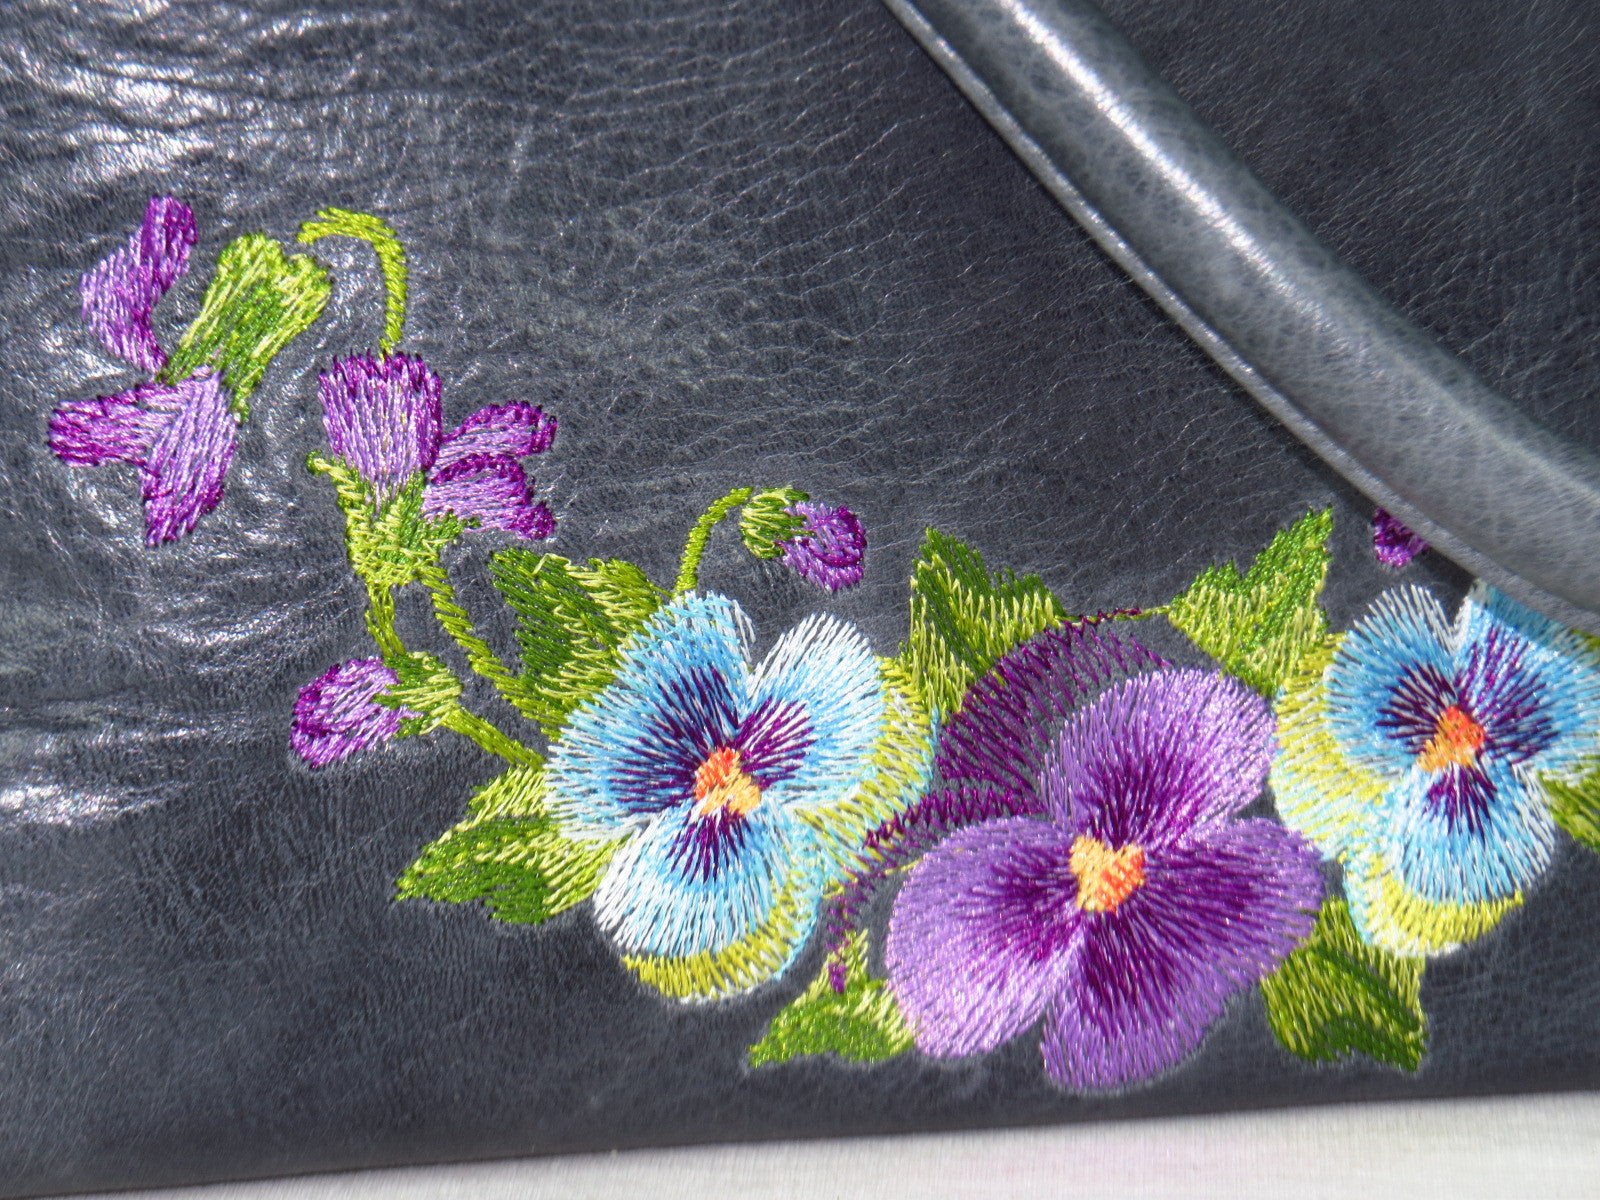 Pansies on Slate Blue Slouchy Hobo Leather Bag embroidery closeup